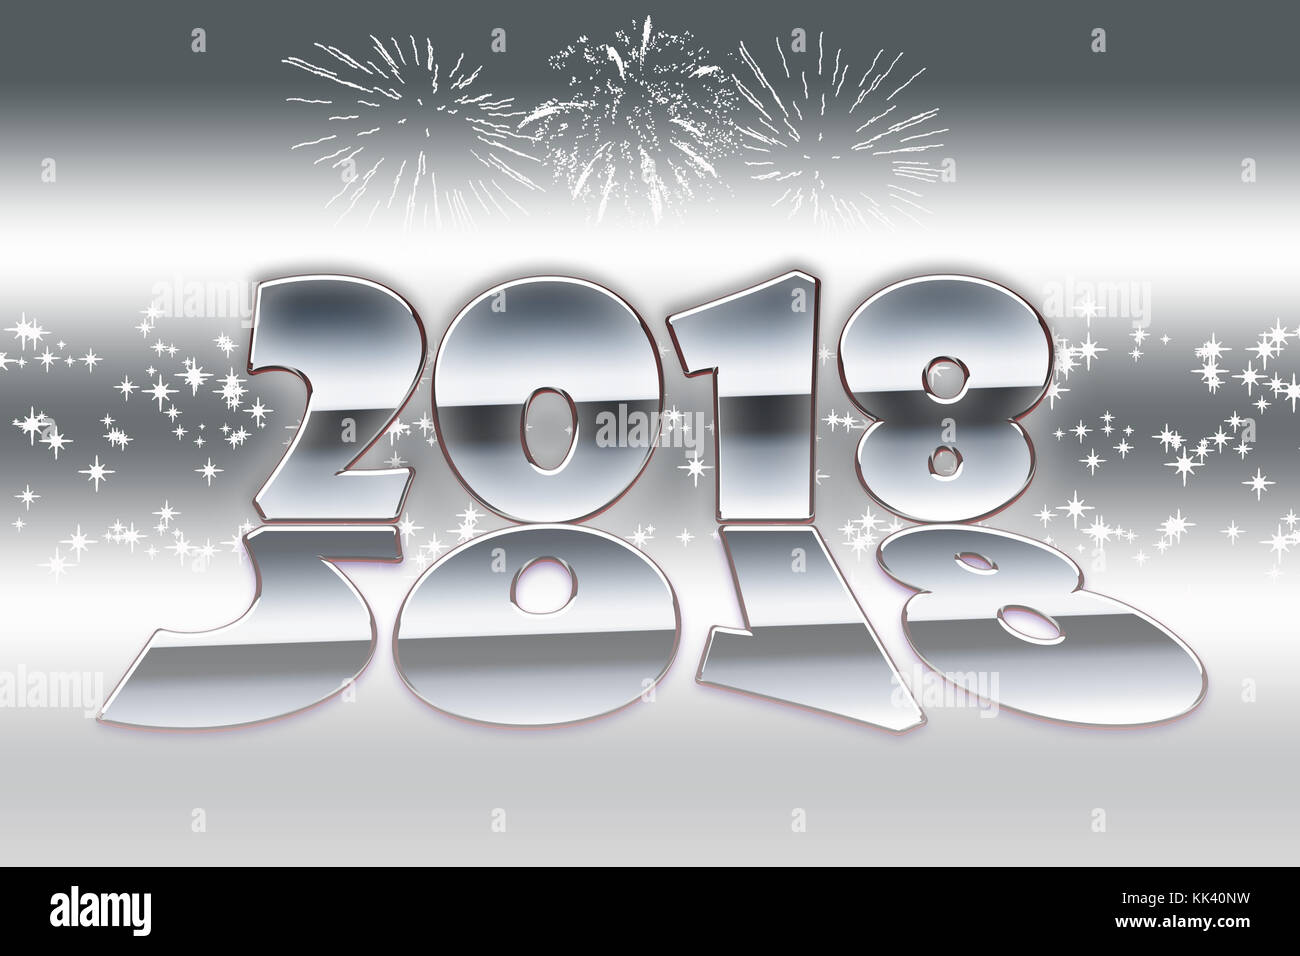 illustration of the new year 2018 on a silver background with stars Stock Photo